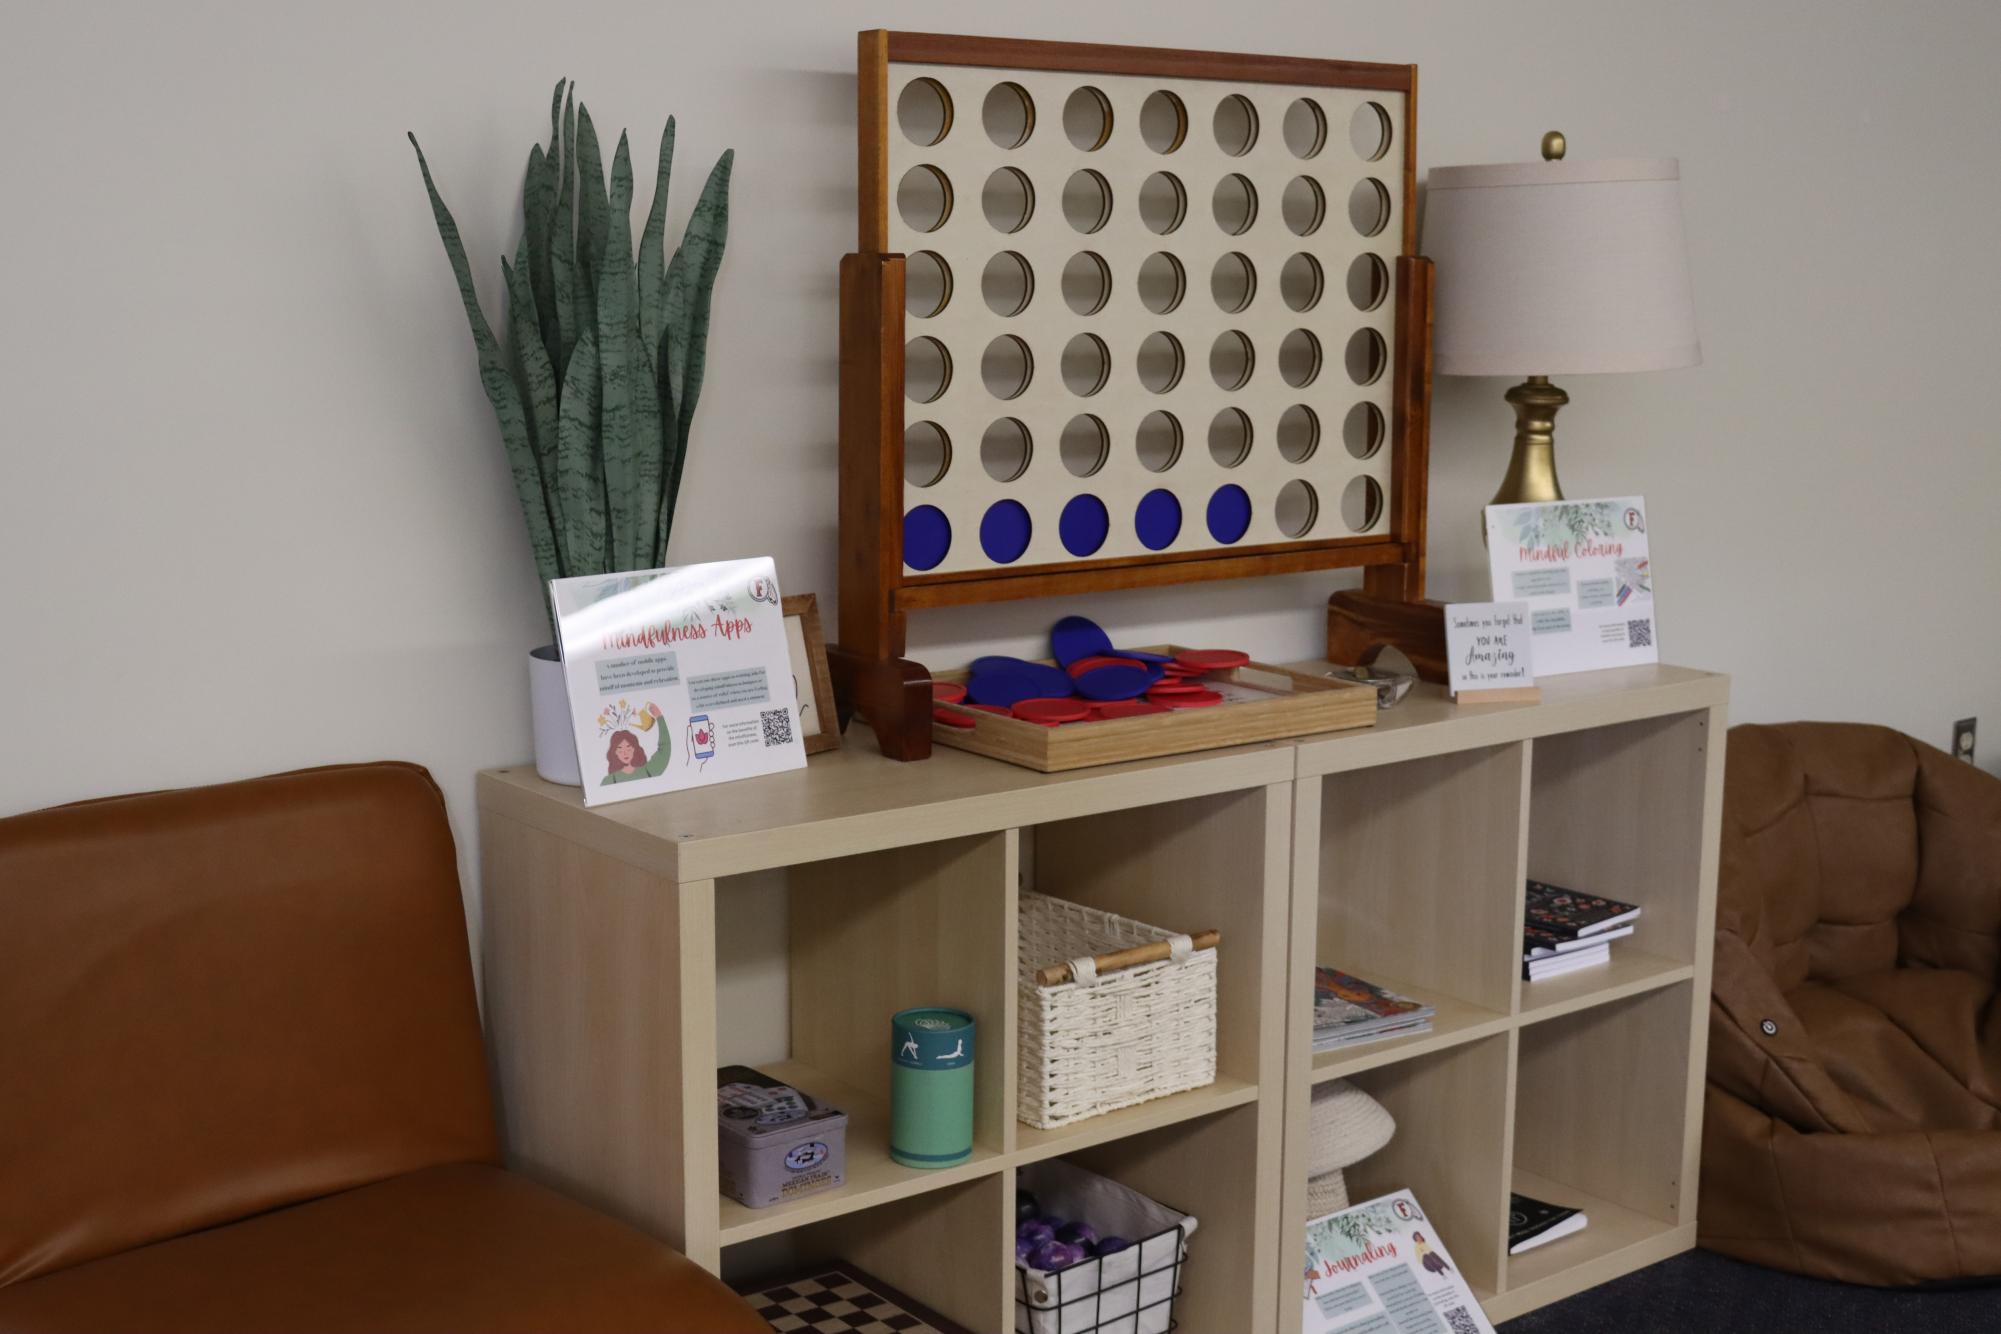 The Wellness Center has many games like Connect 4 for students to enjoy. It also features places to sit and relax while students listen to ambient music.